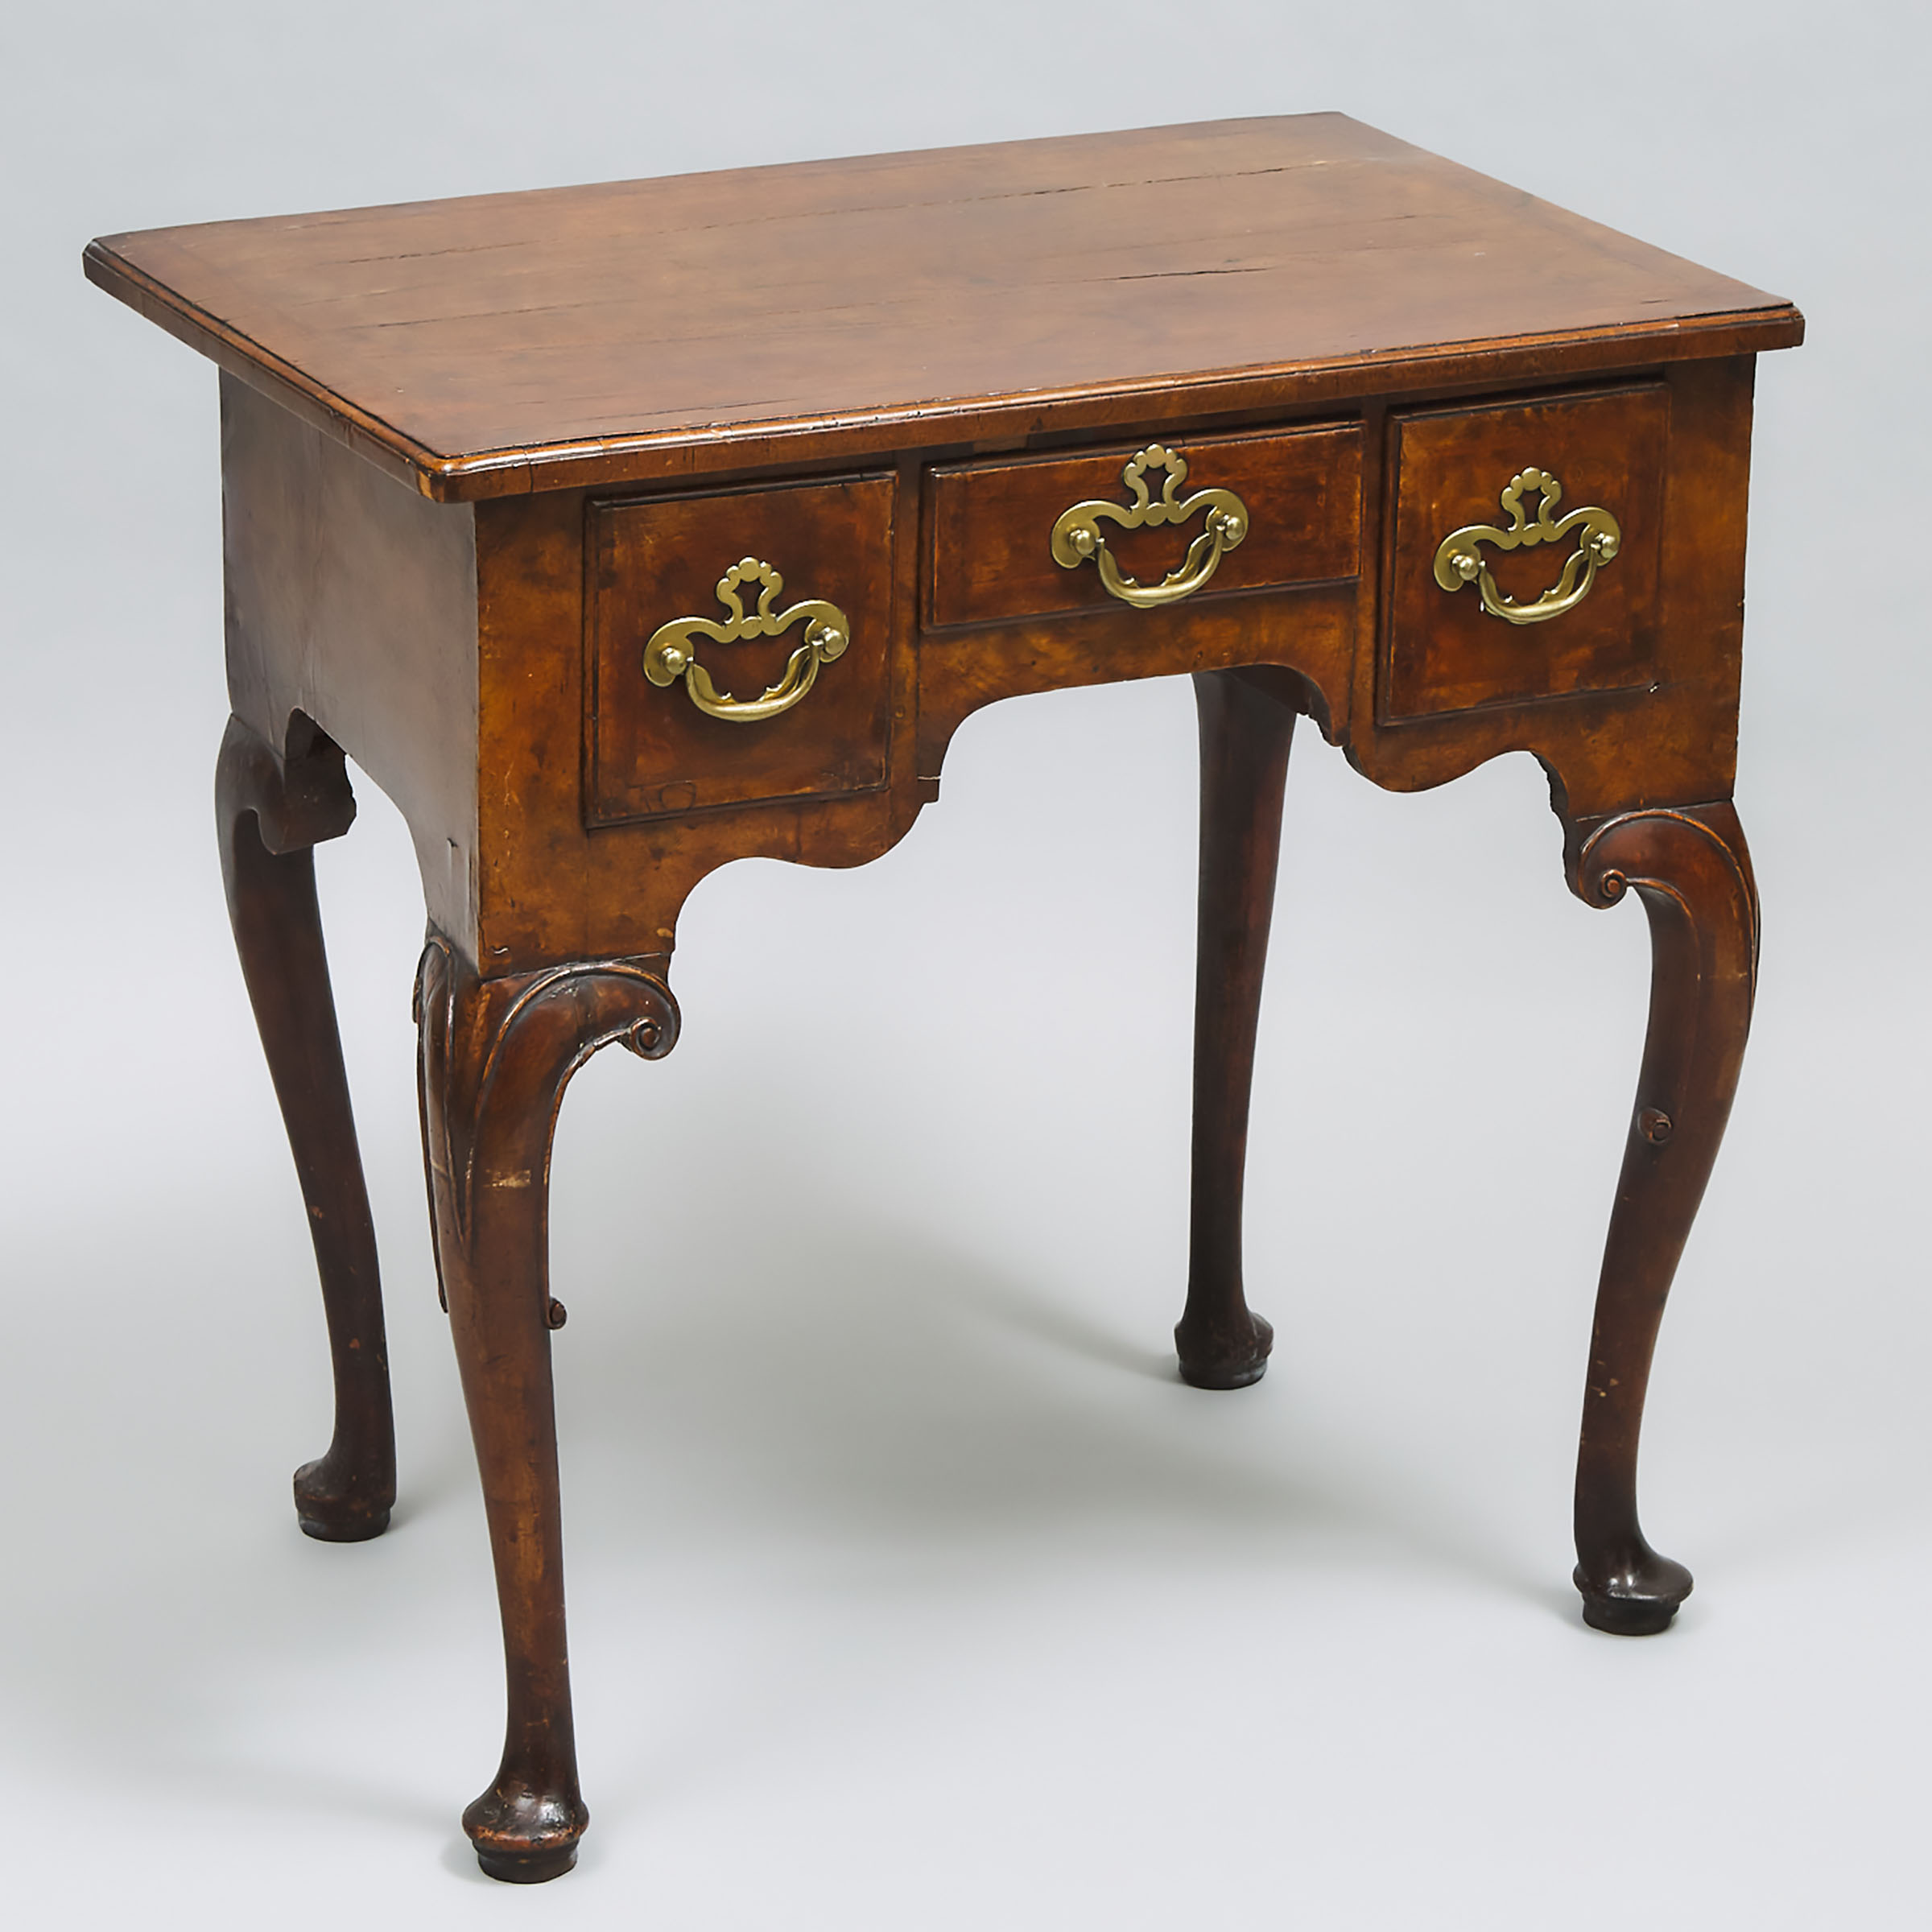 Small George II Walnut Dressing Table, early 18th century